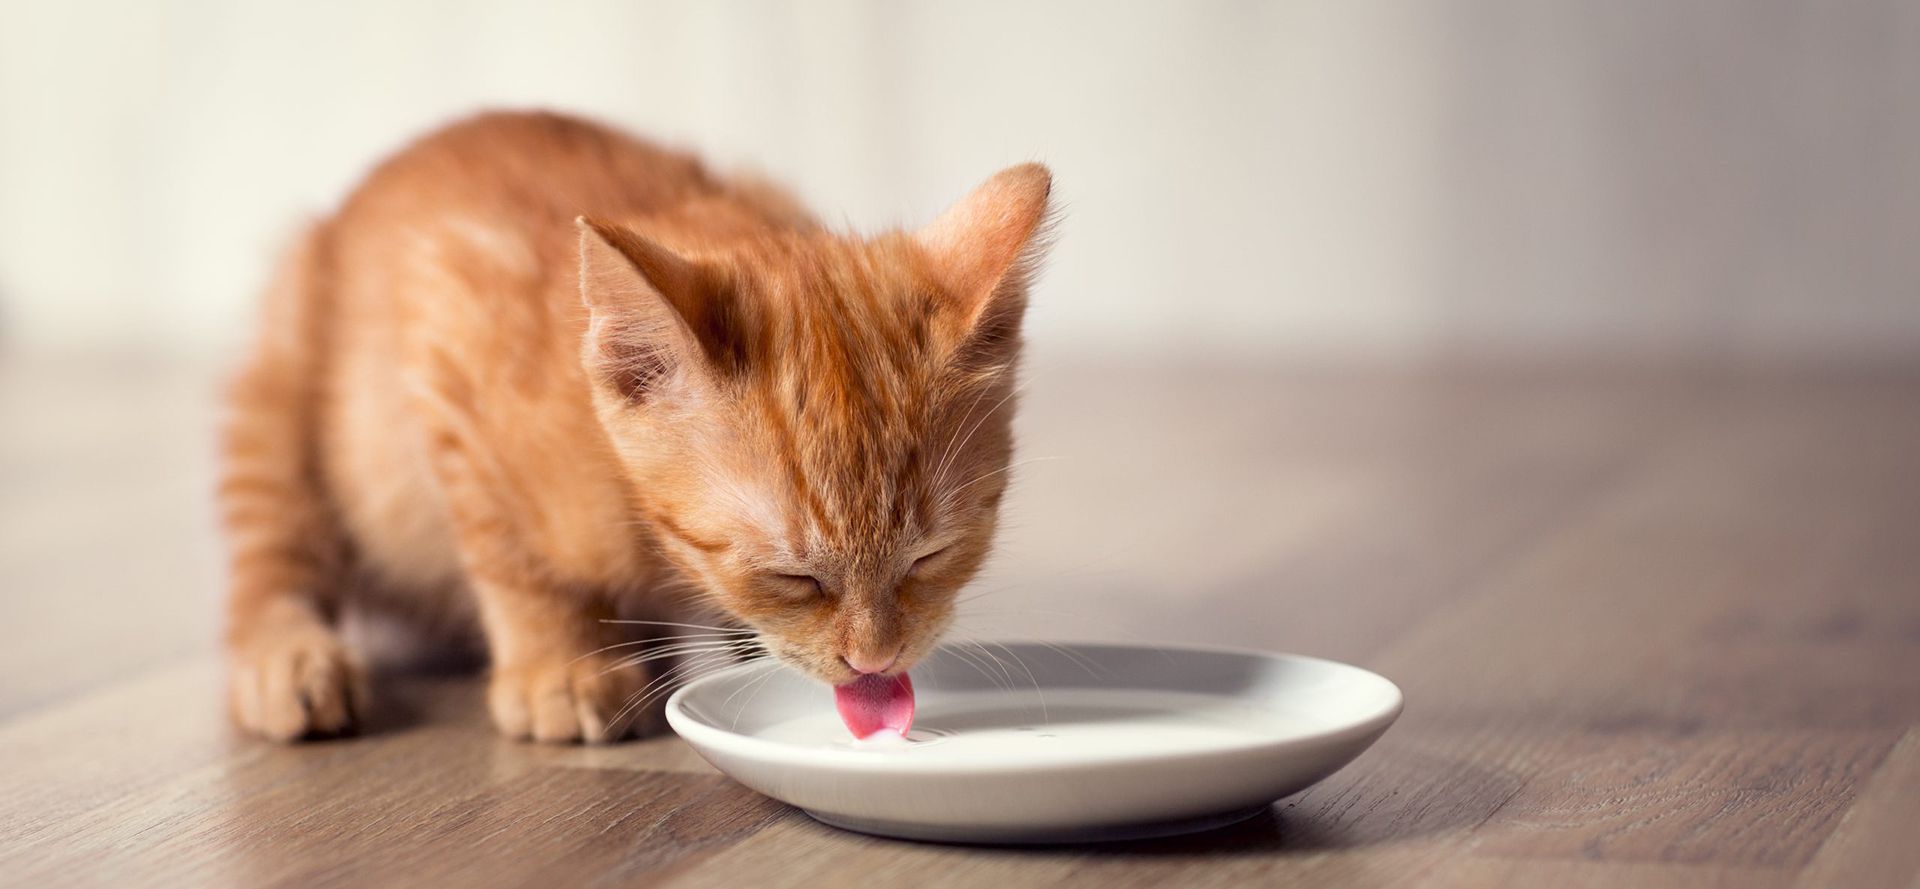 Ginger cat eats from a bowl.